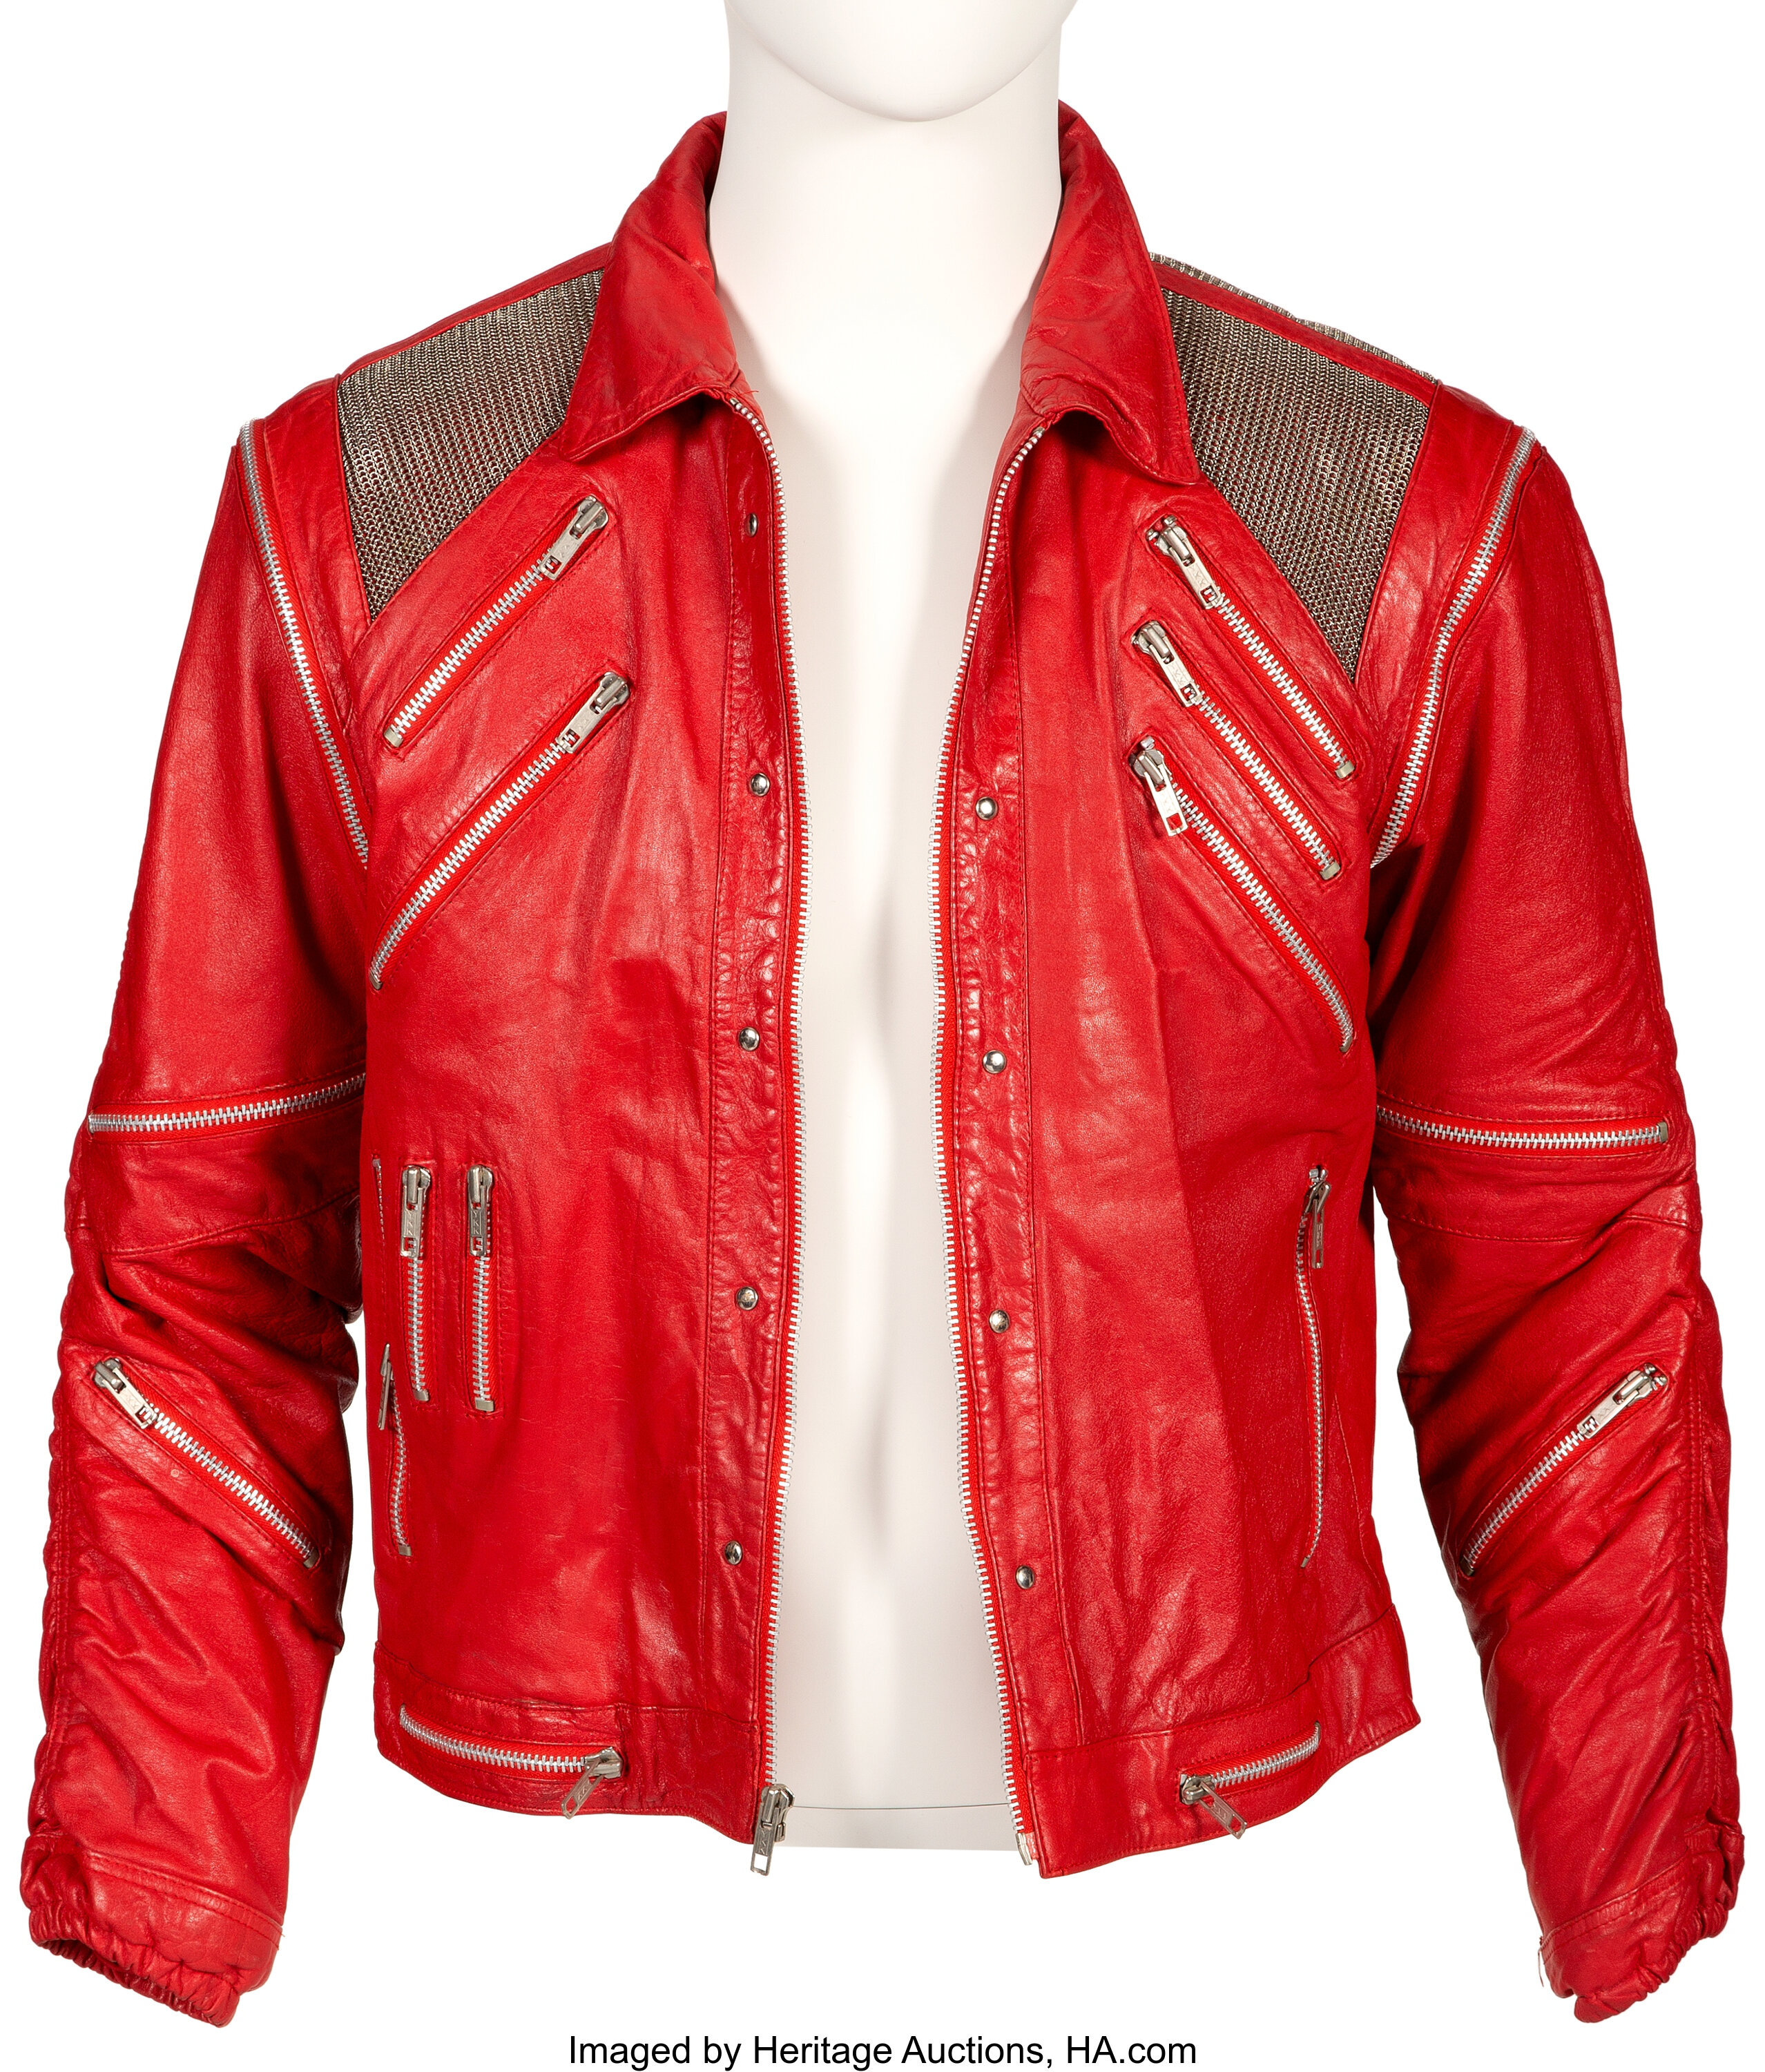 Michael Jackson Signed Personal Red Leather "Beat It" Jacket (circa | #11247 | Heritage Auctions